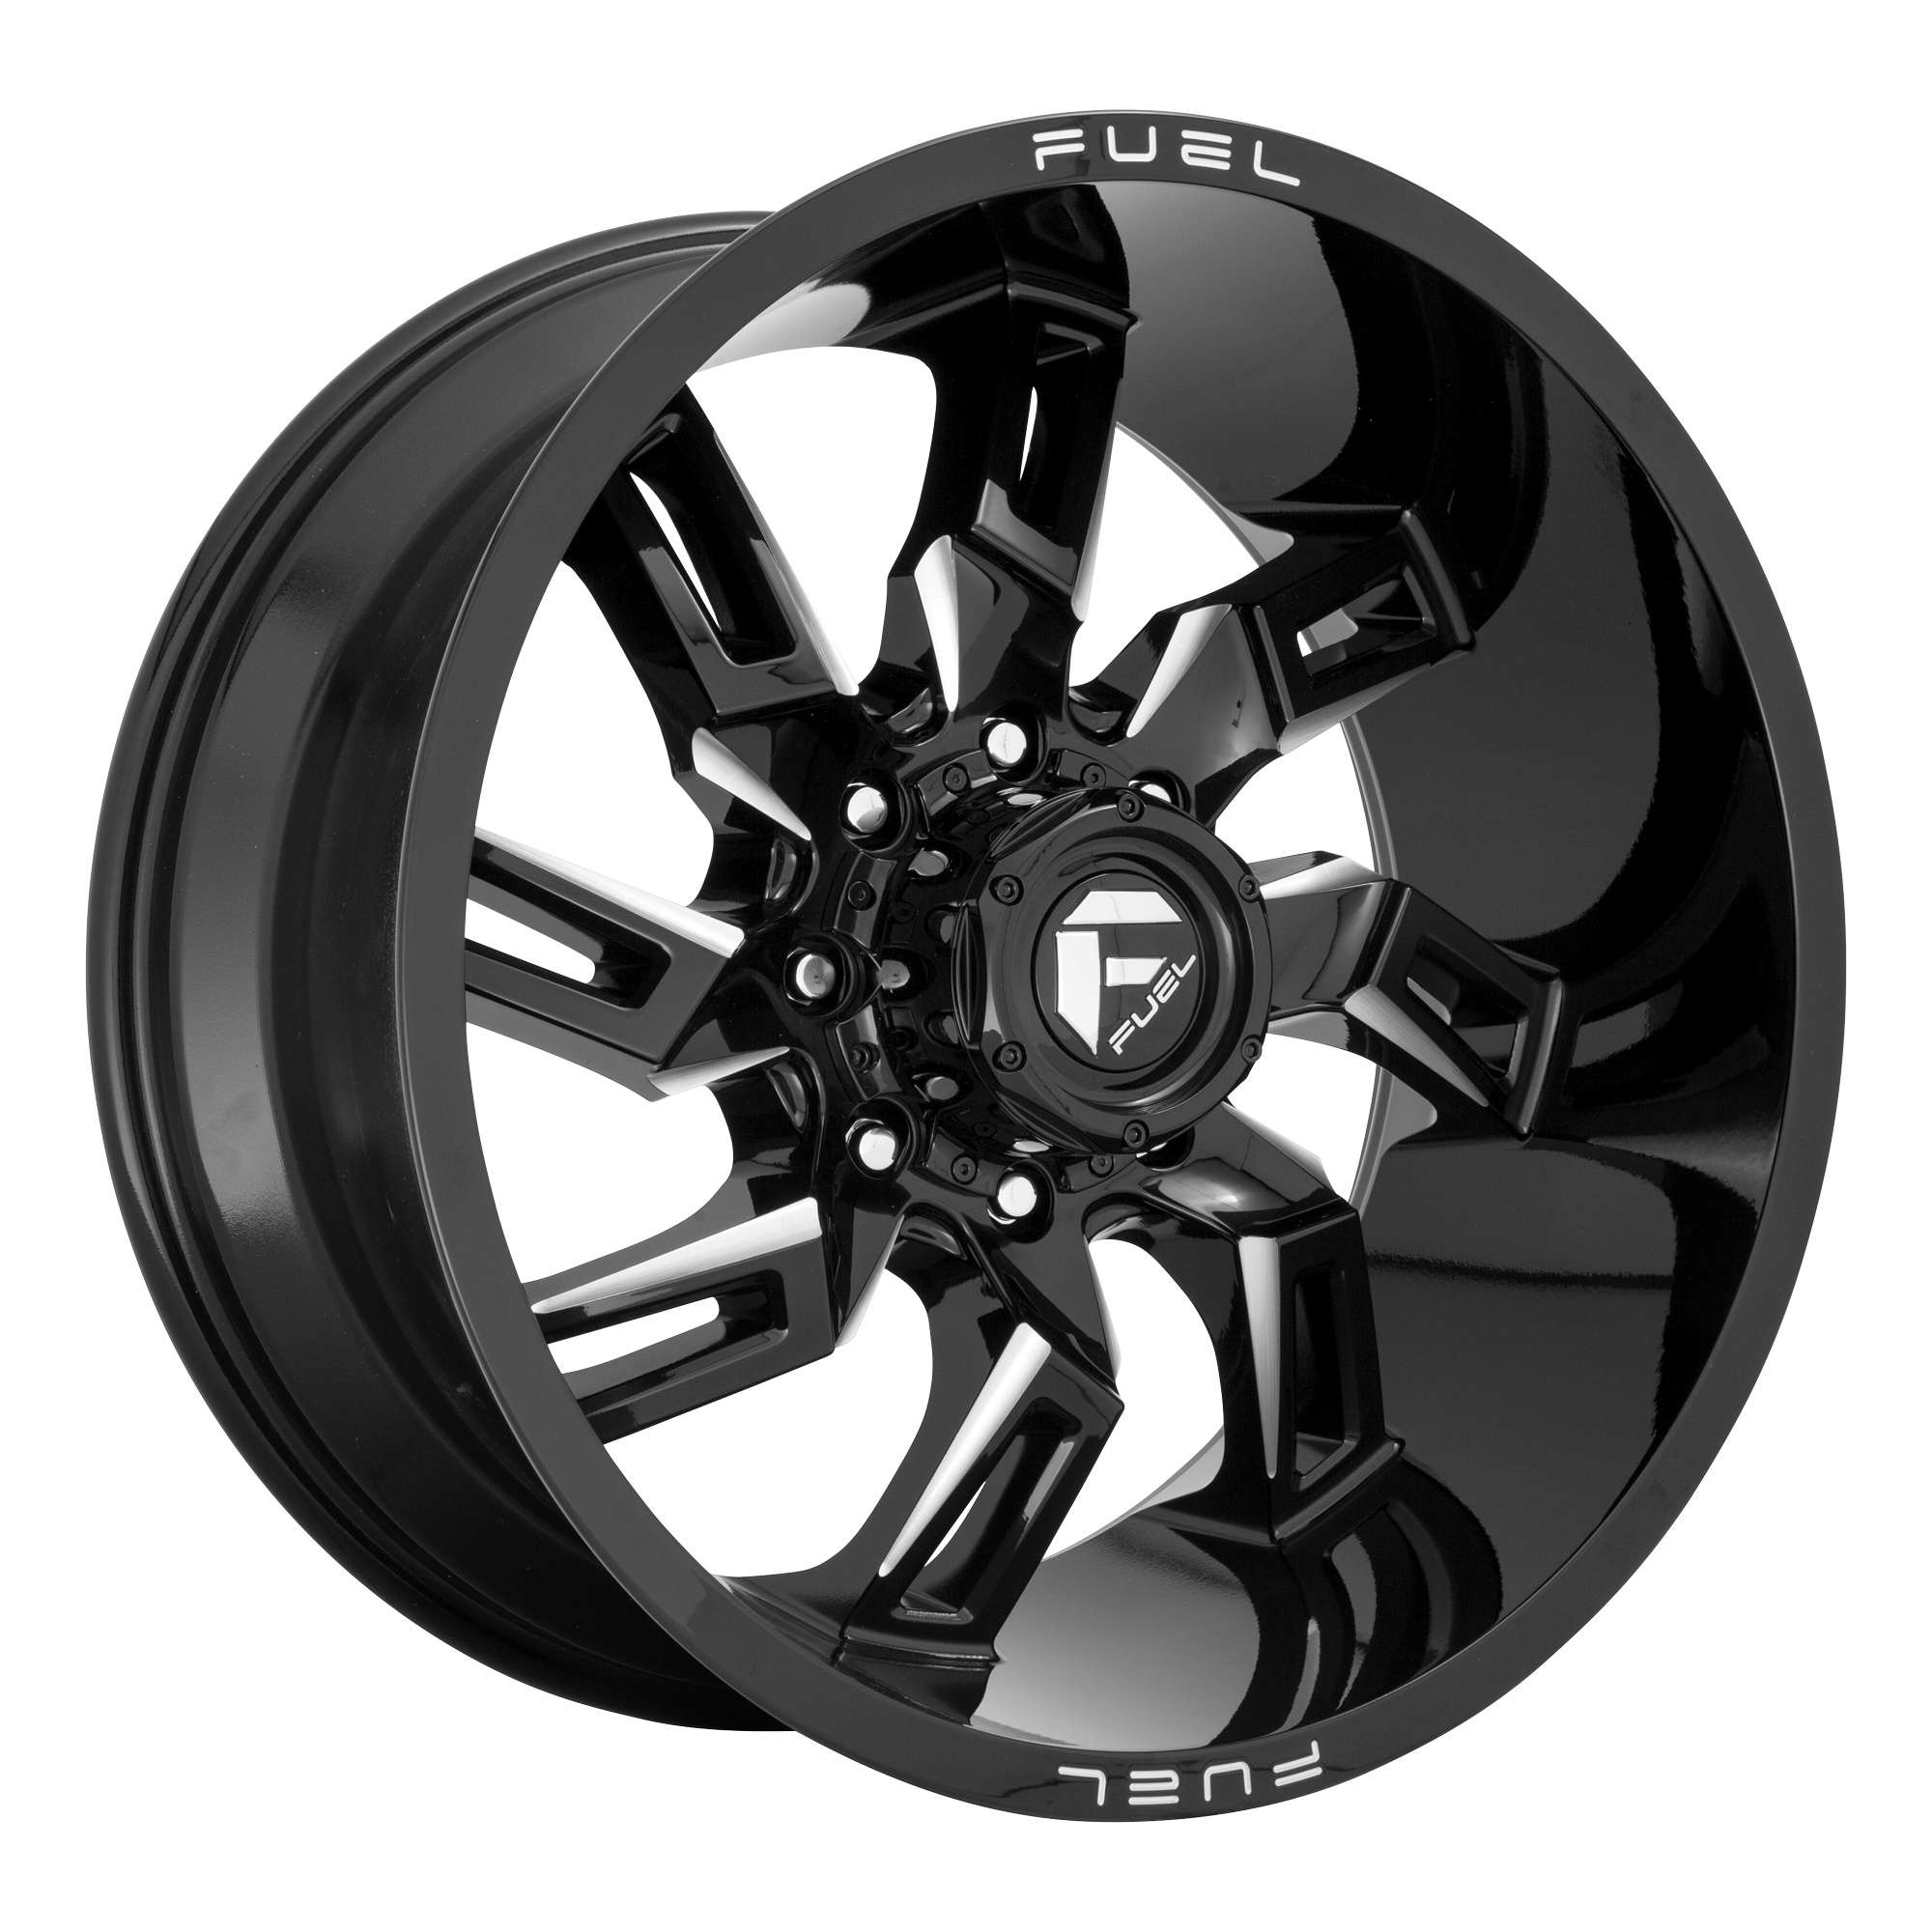 LOCKDOWN 20x9 6x139.70 GLOSS BLACK MILLED (1 mm) - Tires and Engine Performance